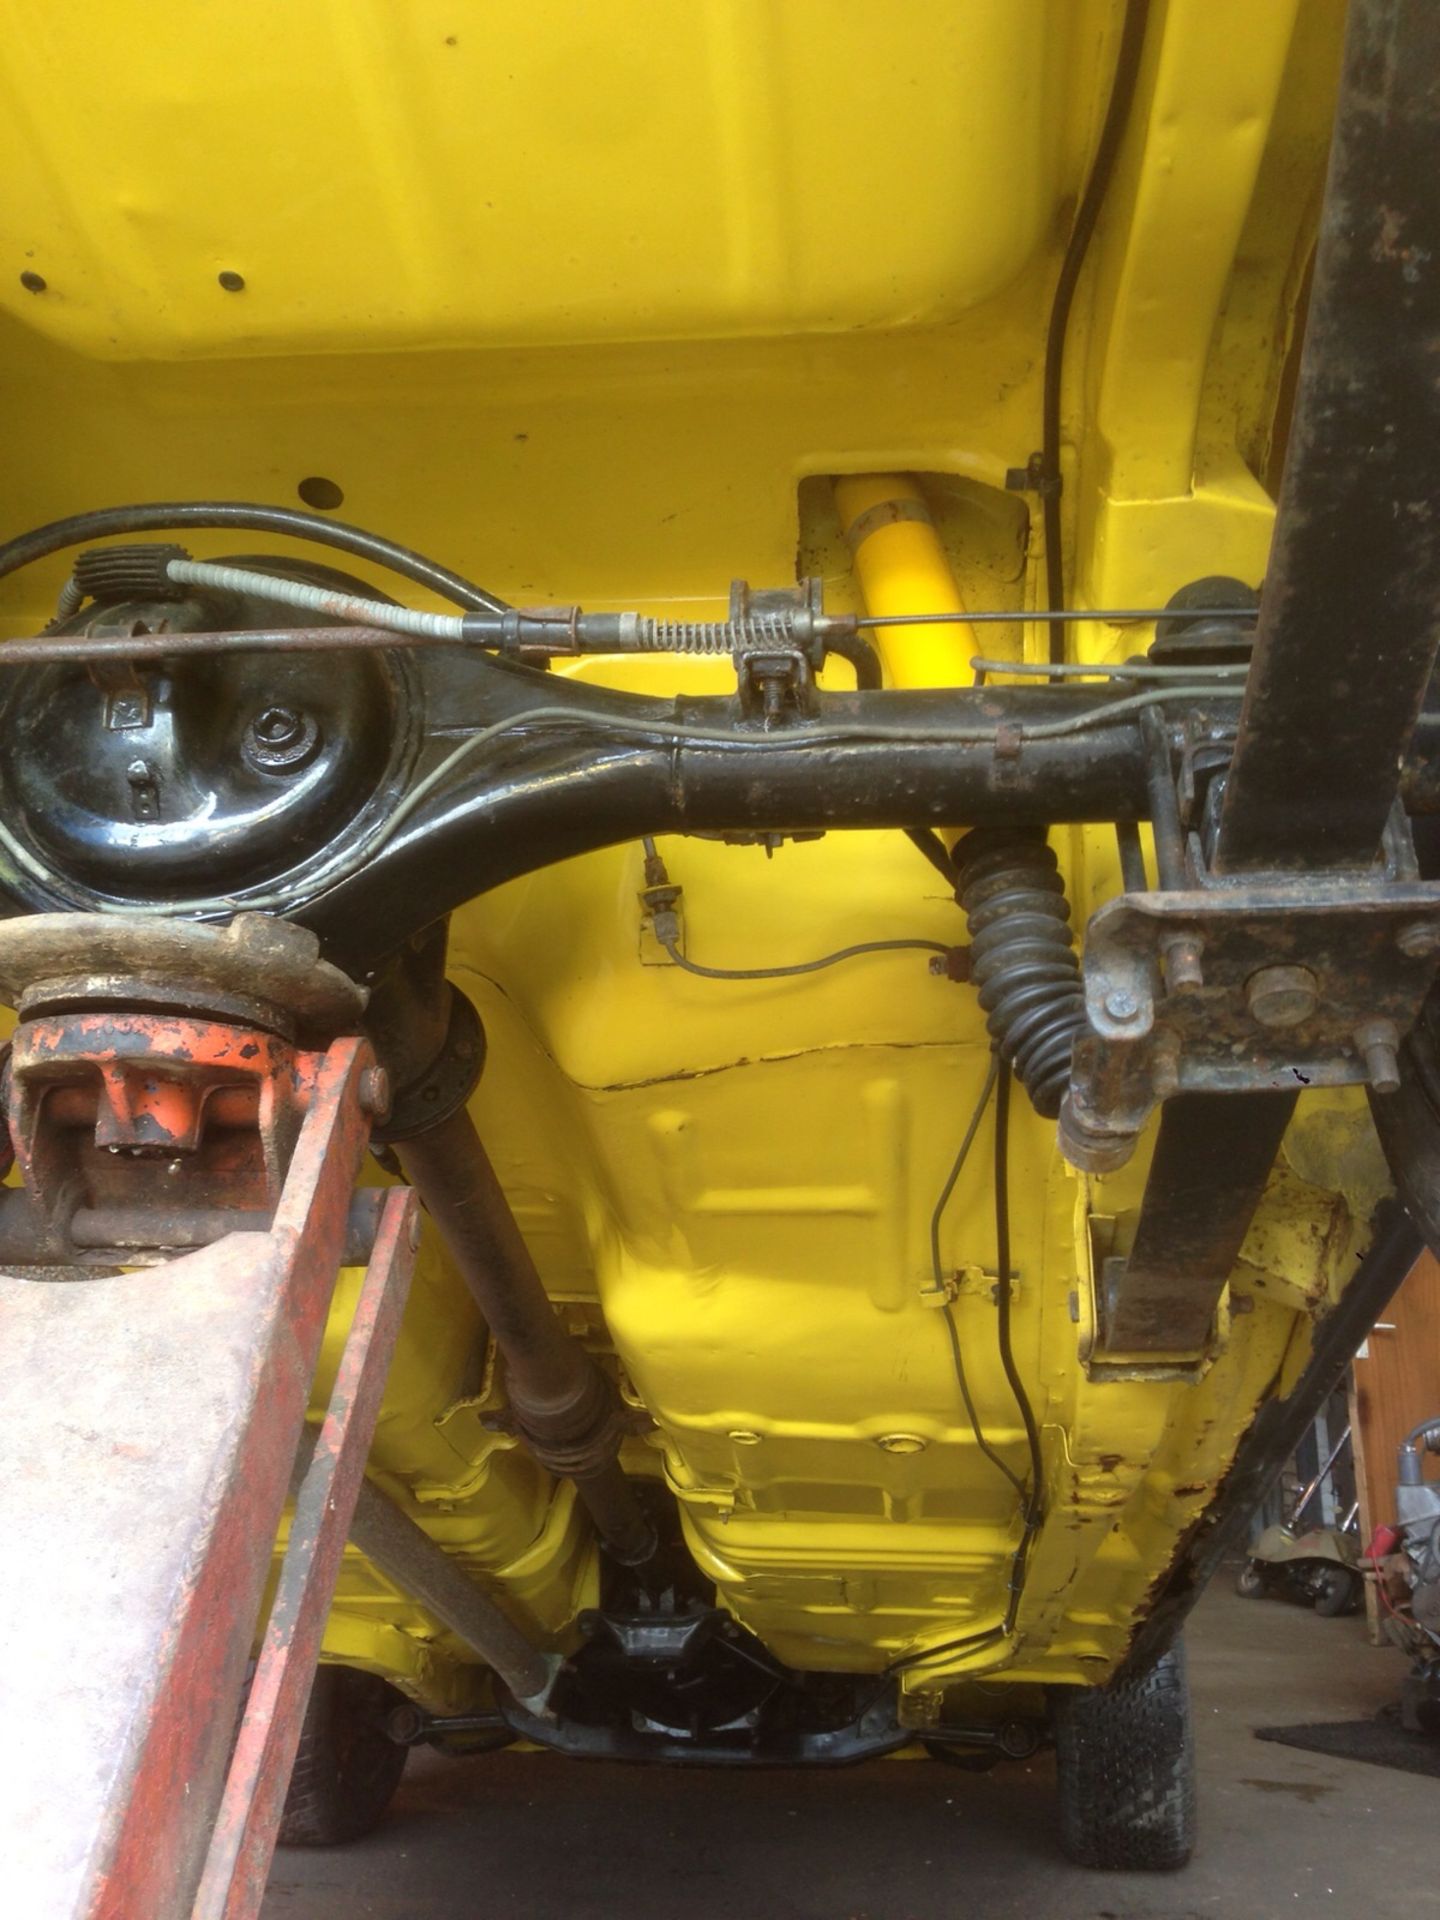 1979/T Ford Escort mk2 1600 Sport - in Signal yellow -  UK car  (545 miles) since rebuild - Image 39 of 54